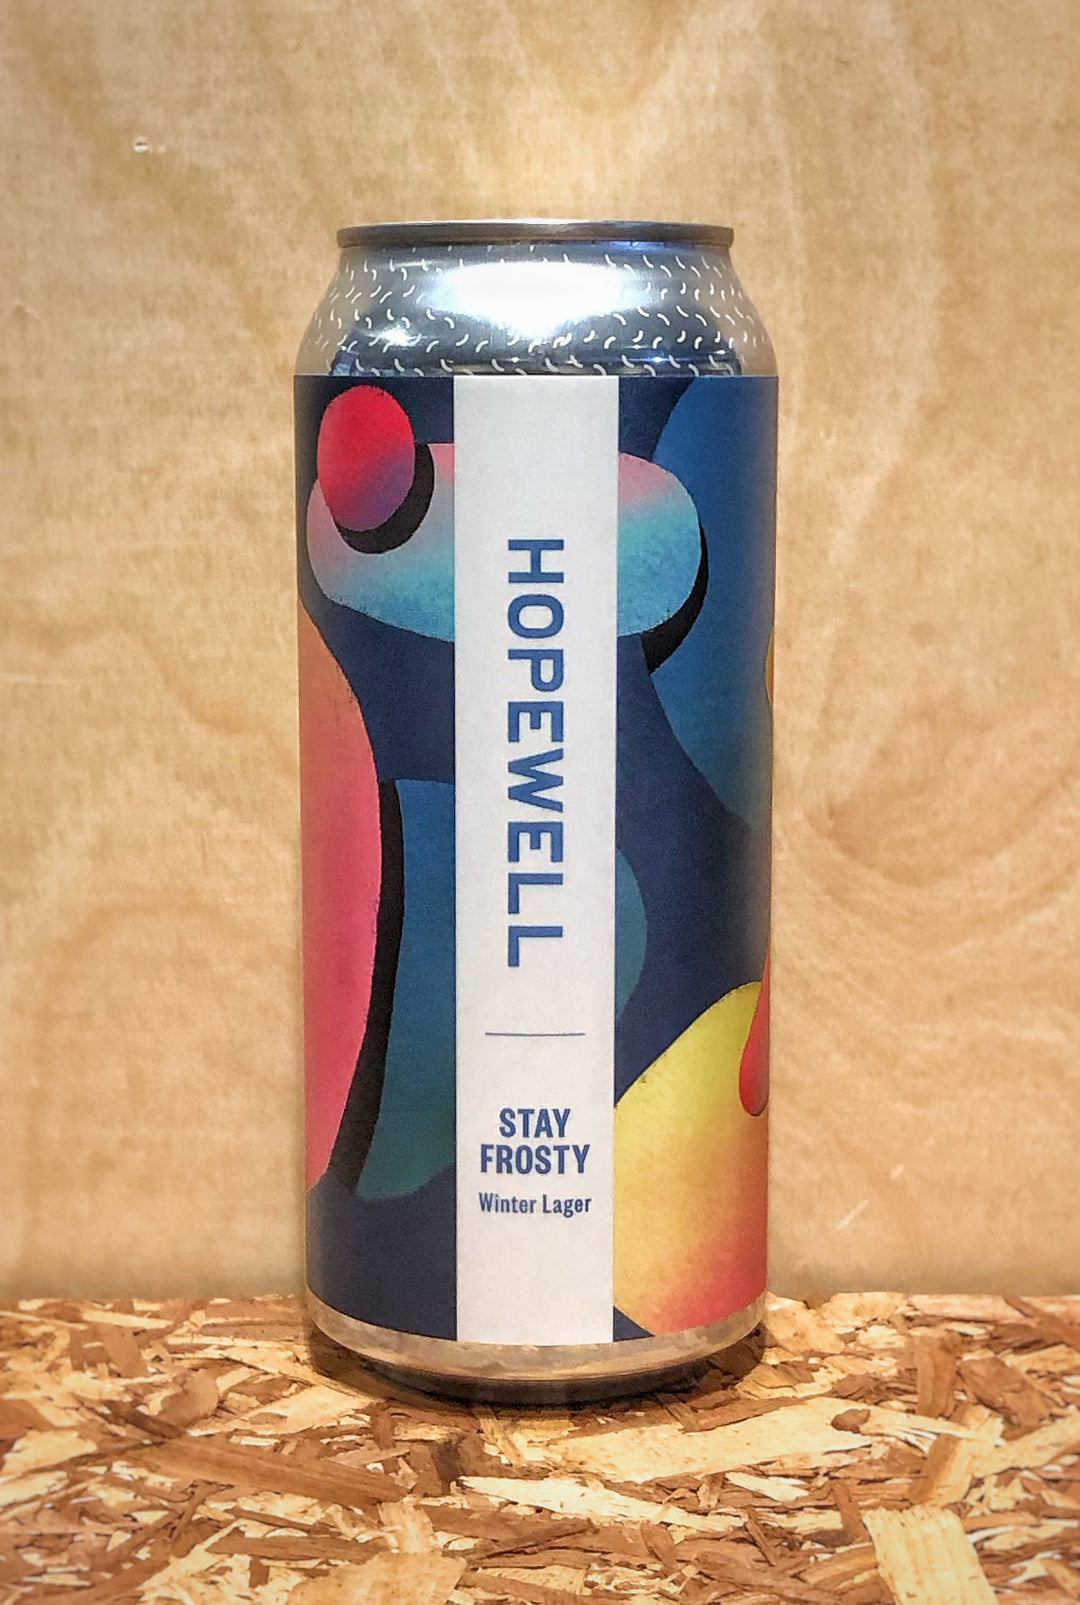 Hopewell 'Stay Frosty' Winter Lager (Chicago, IL)